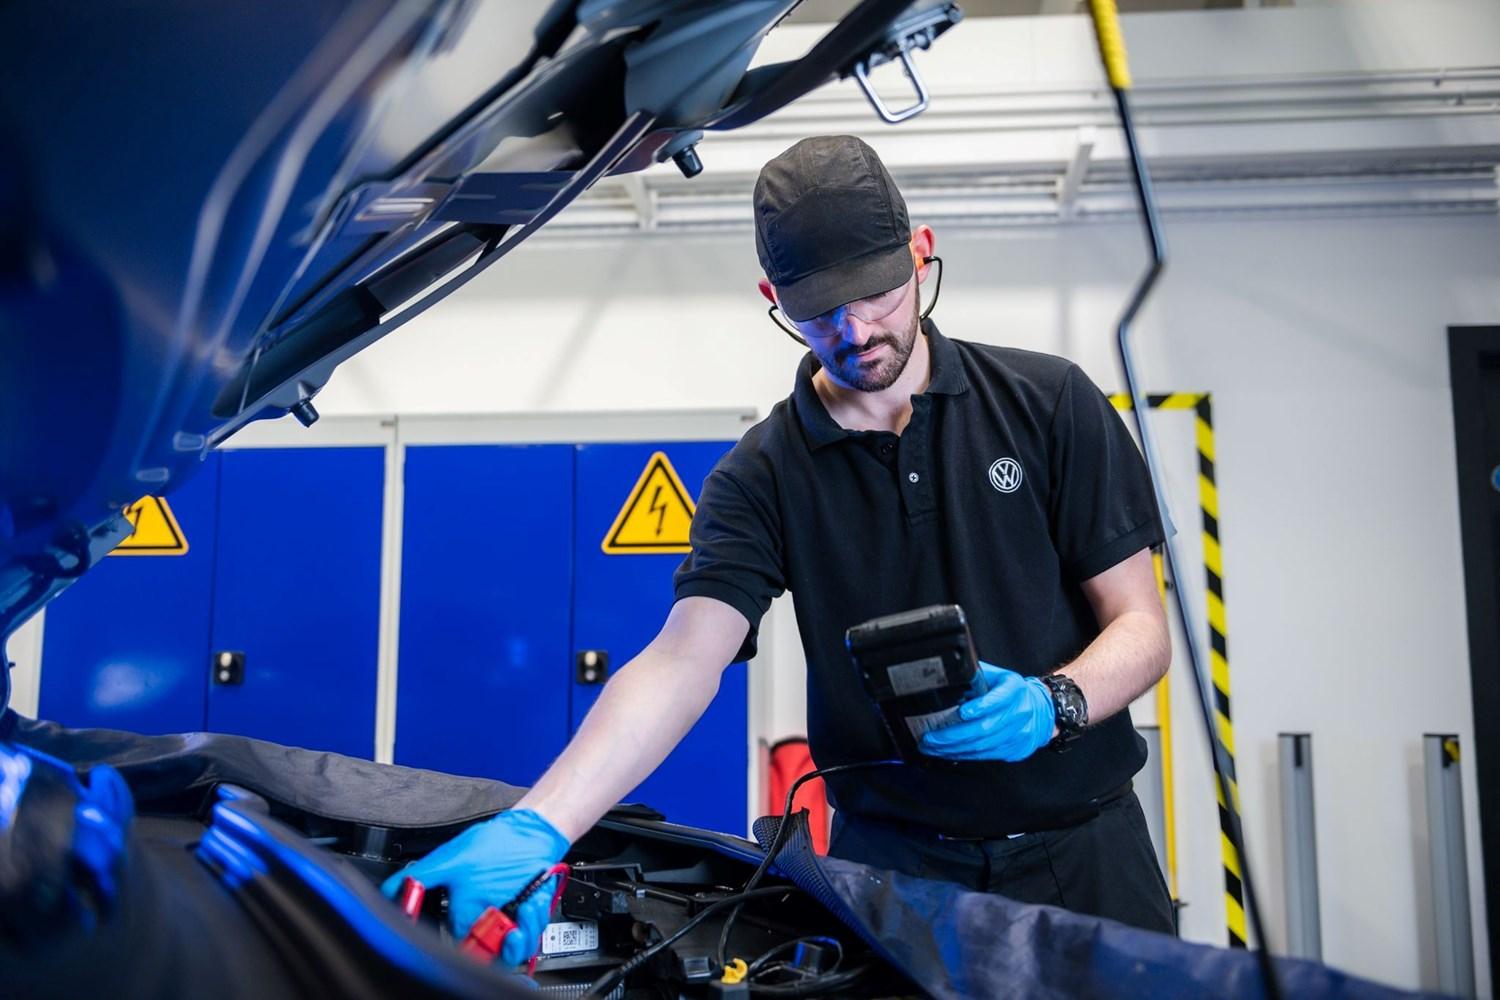 Volkswagen Mechanic inspects battery during service at the Volkswagen Approved Accident Repair Centre, Agnew Volkswagen Belfast